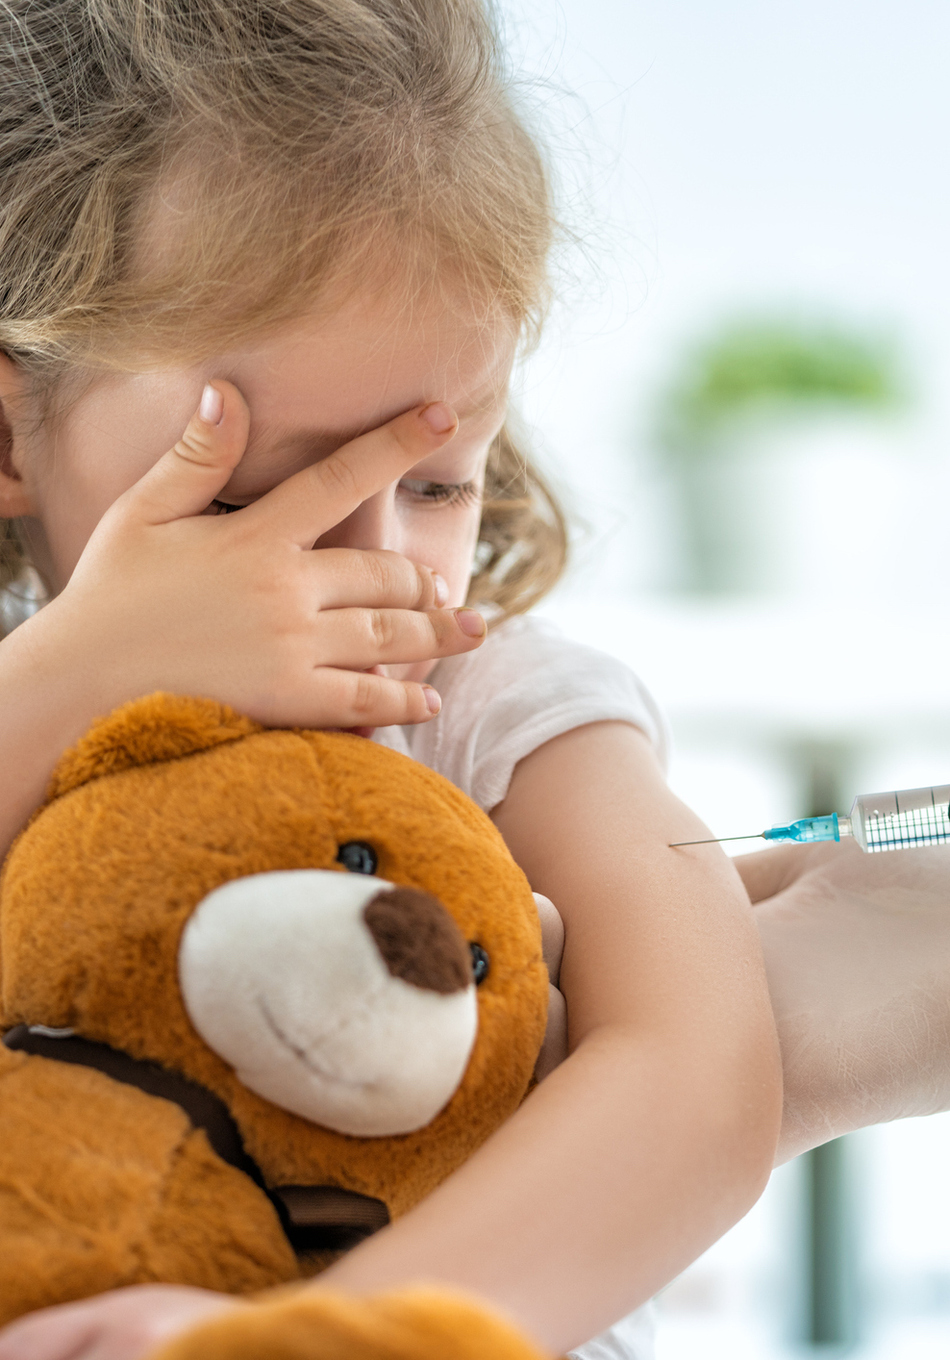 How to Prevent Needle Phobia in Kids